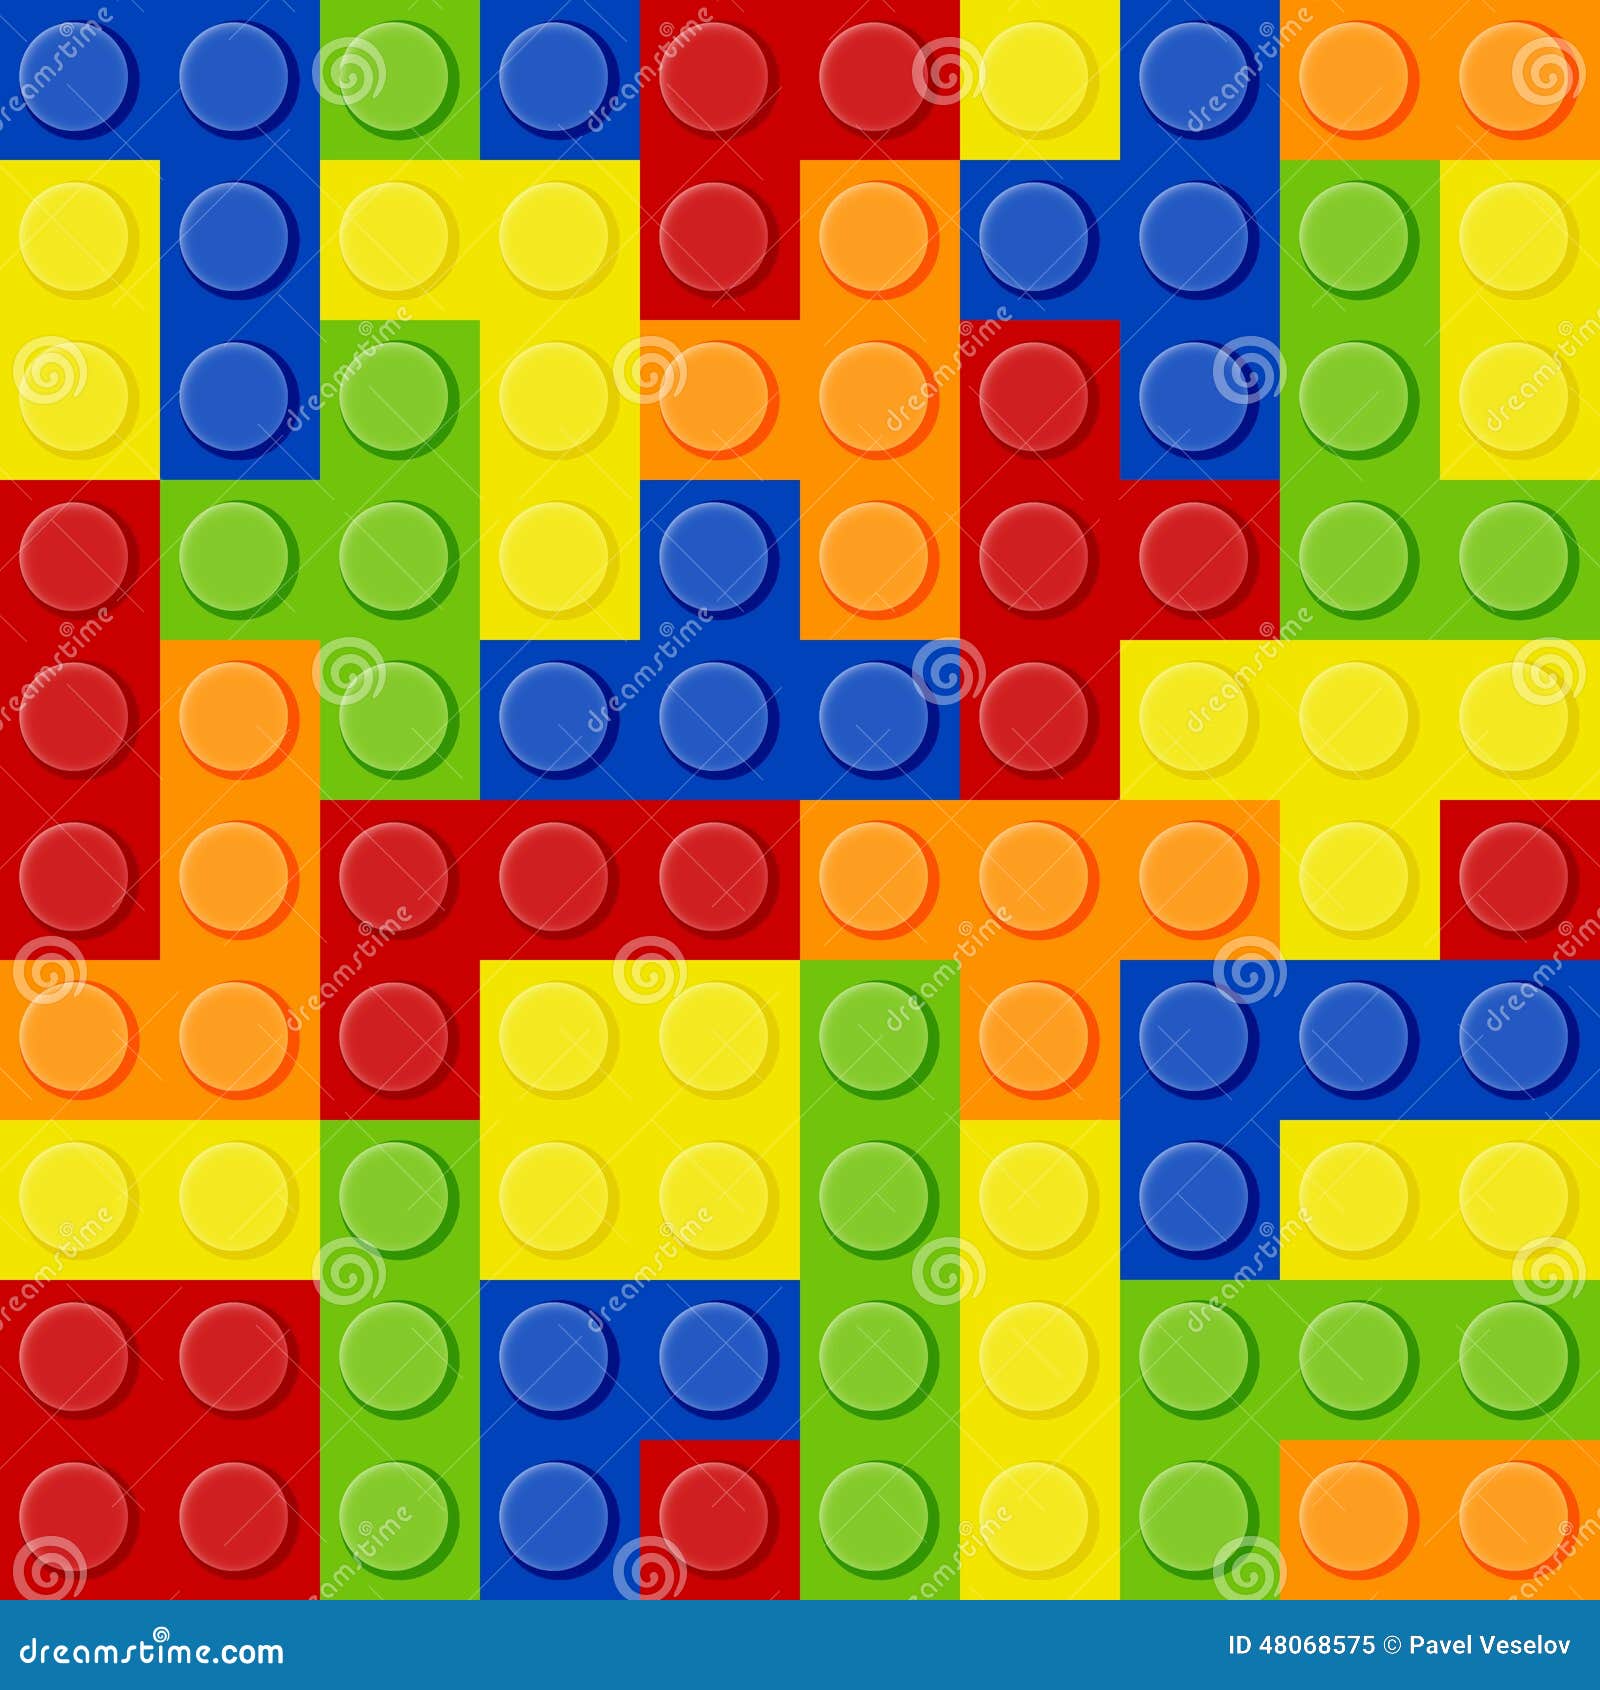 Download Tetris wallpapers for mobile phone free Tetris HD pictures